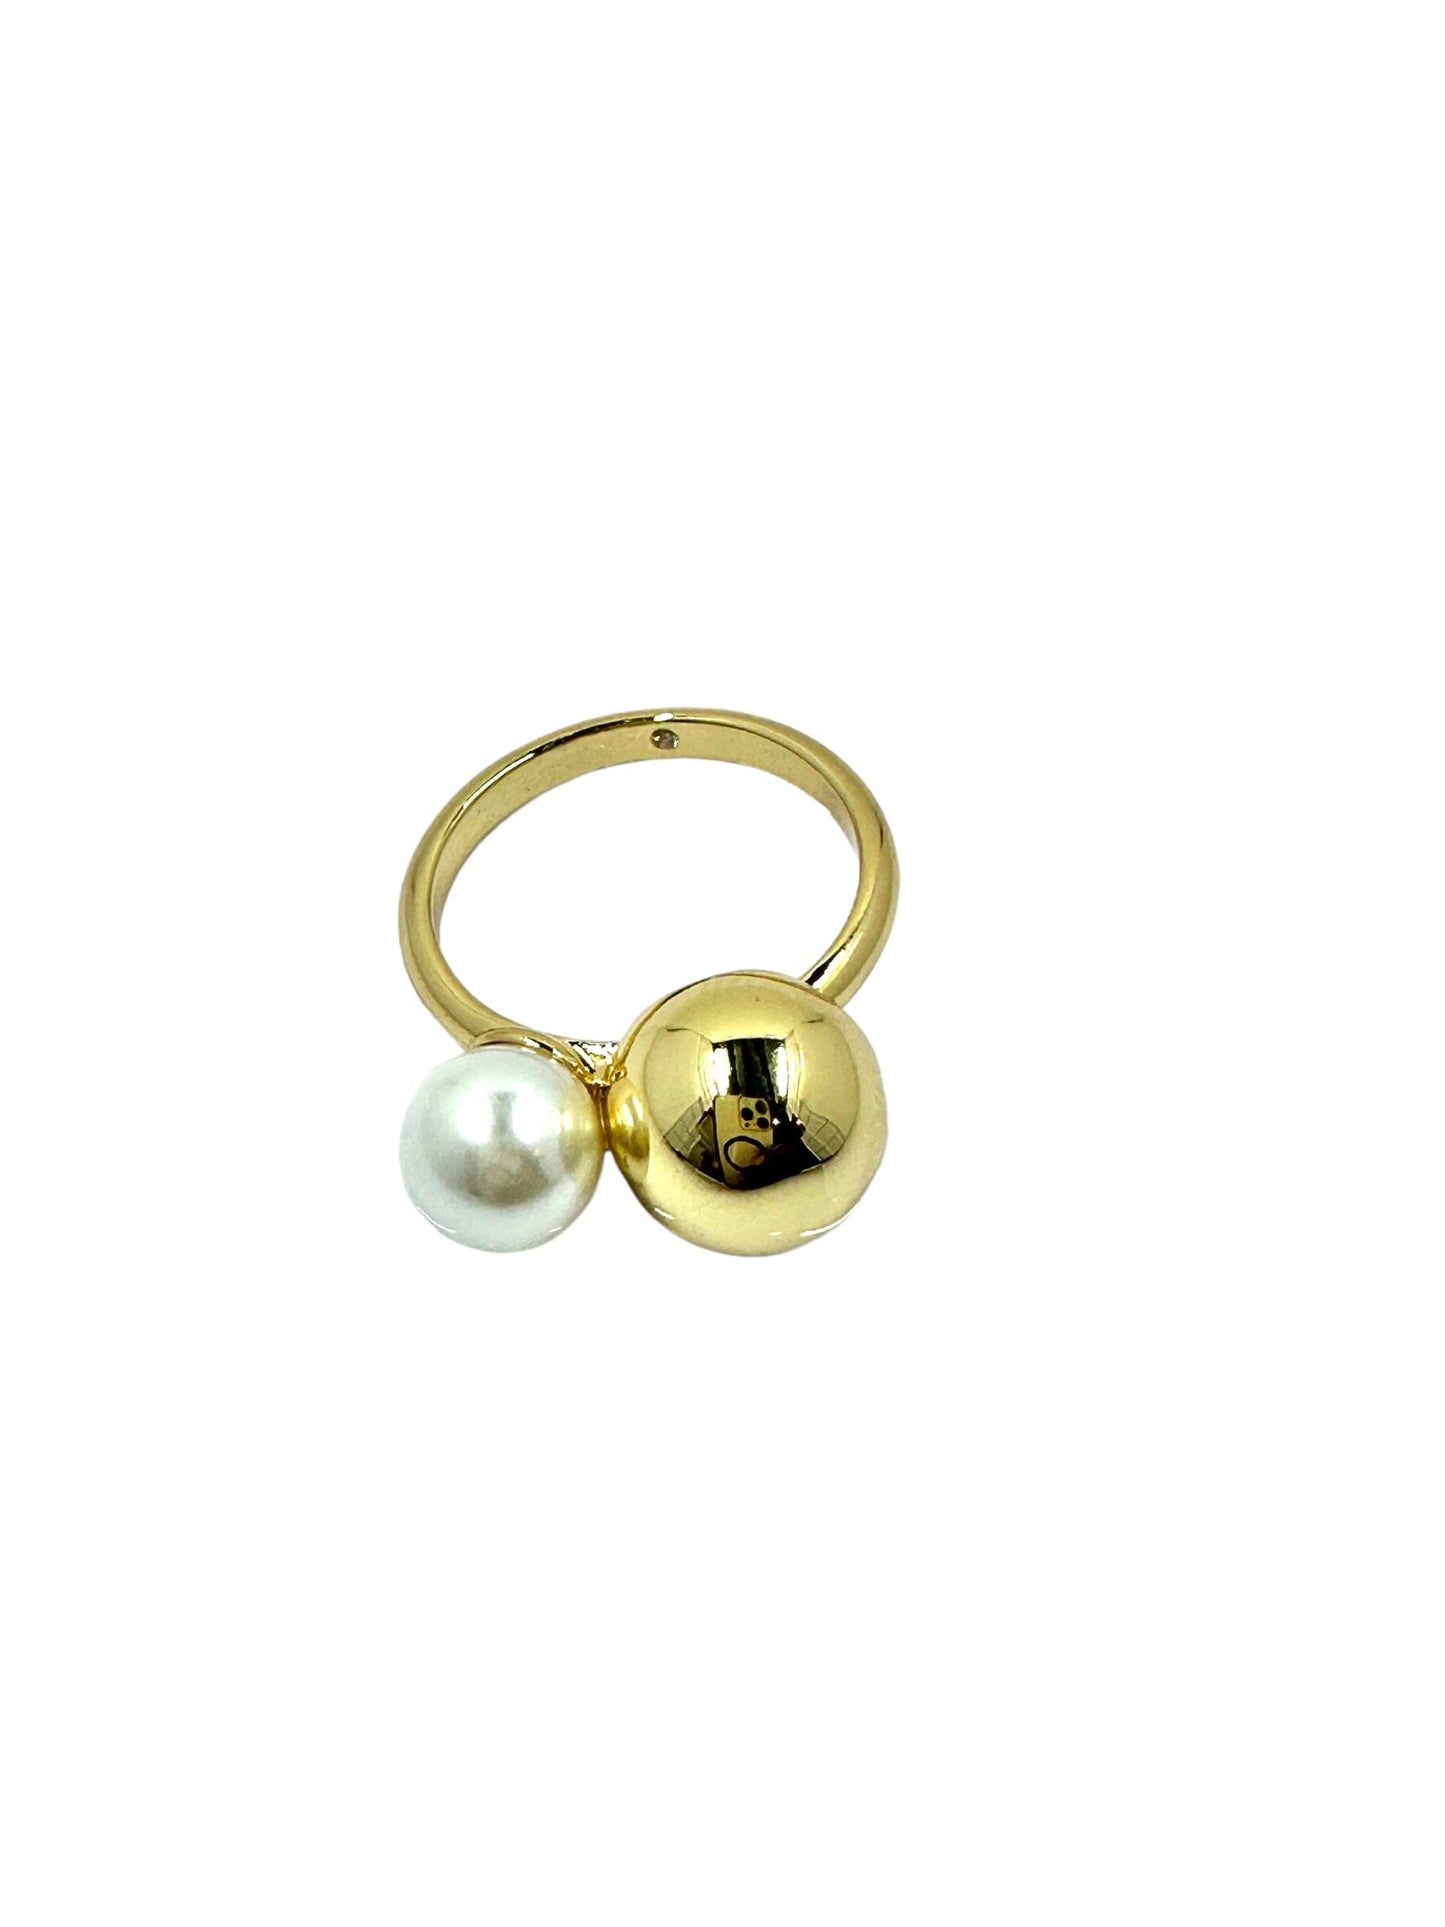 Carrie Pearl Strung Gold Ball Ring Rings Trendzio Jewelry 6 